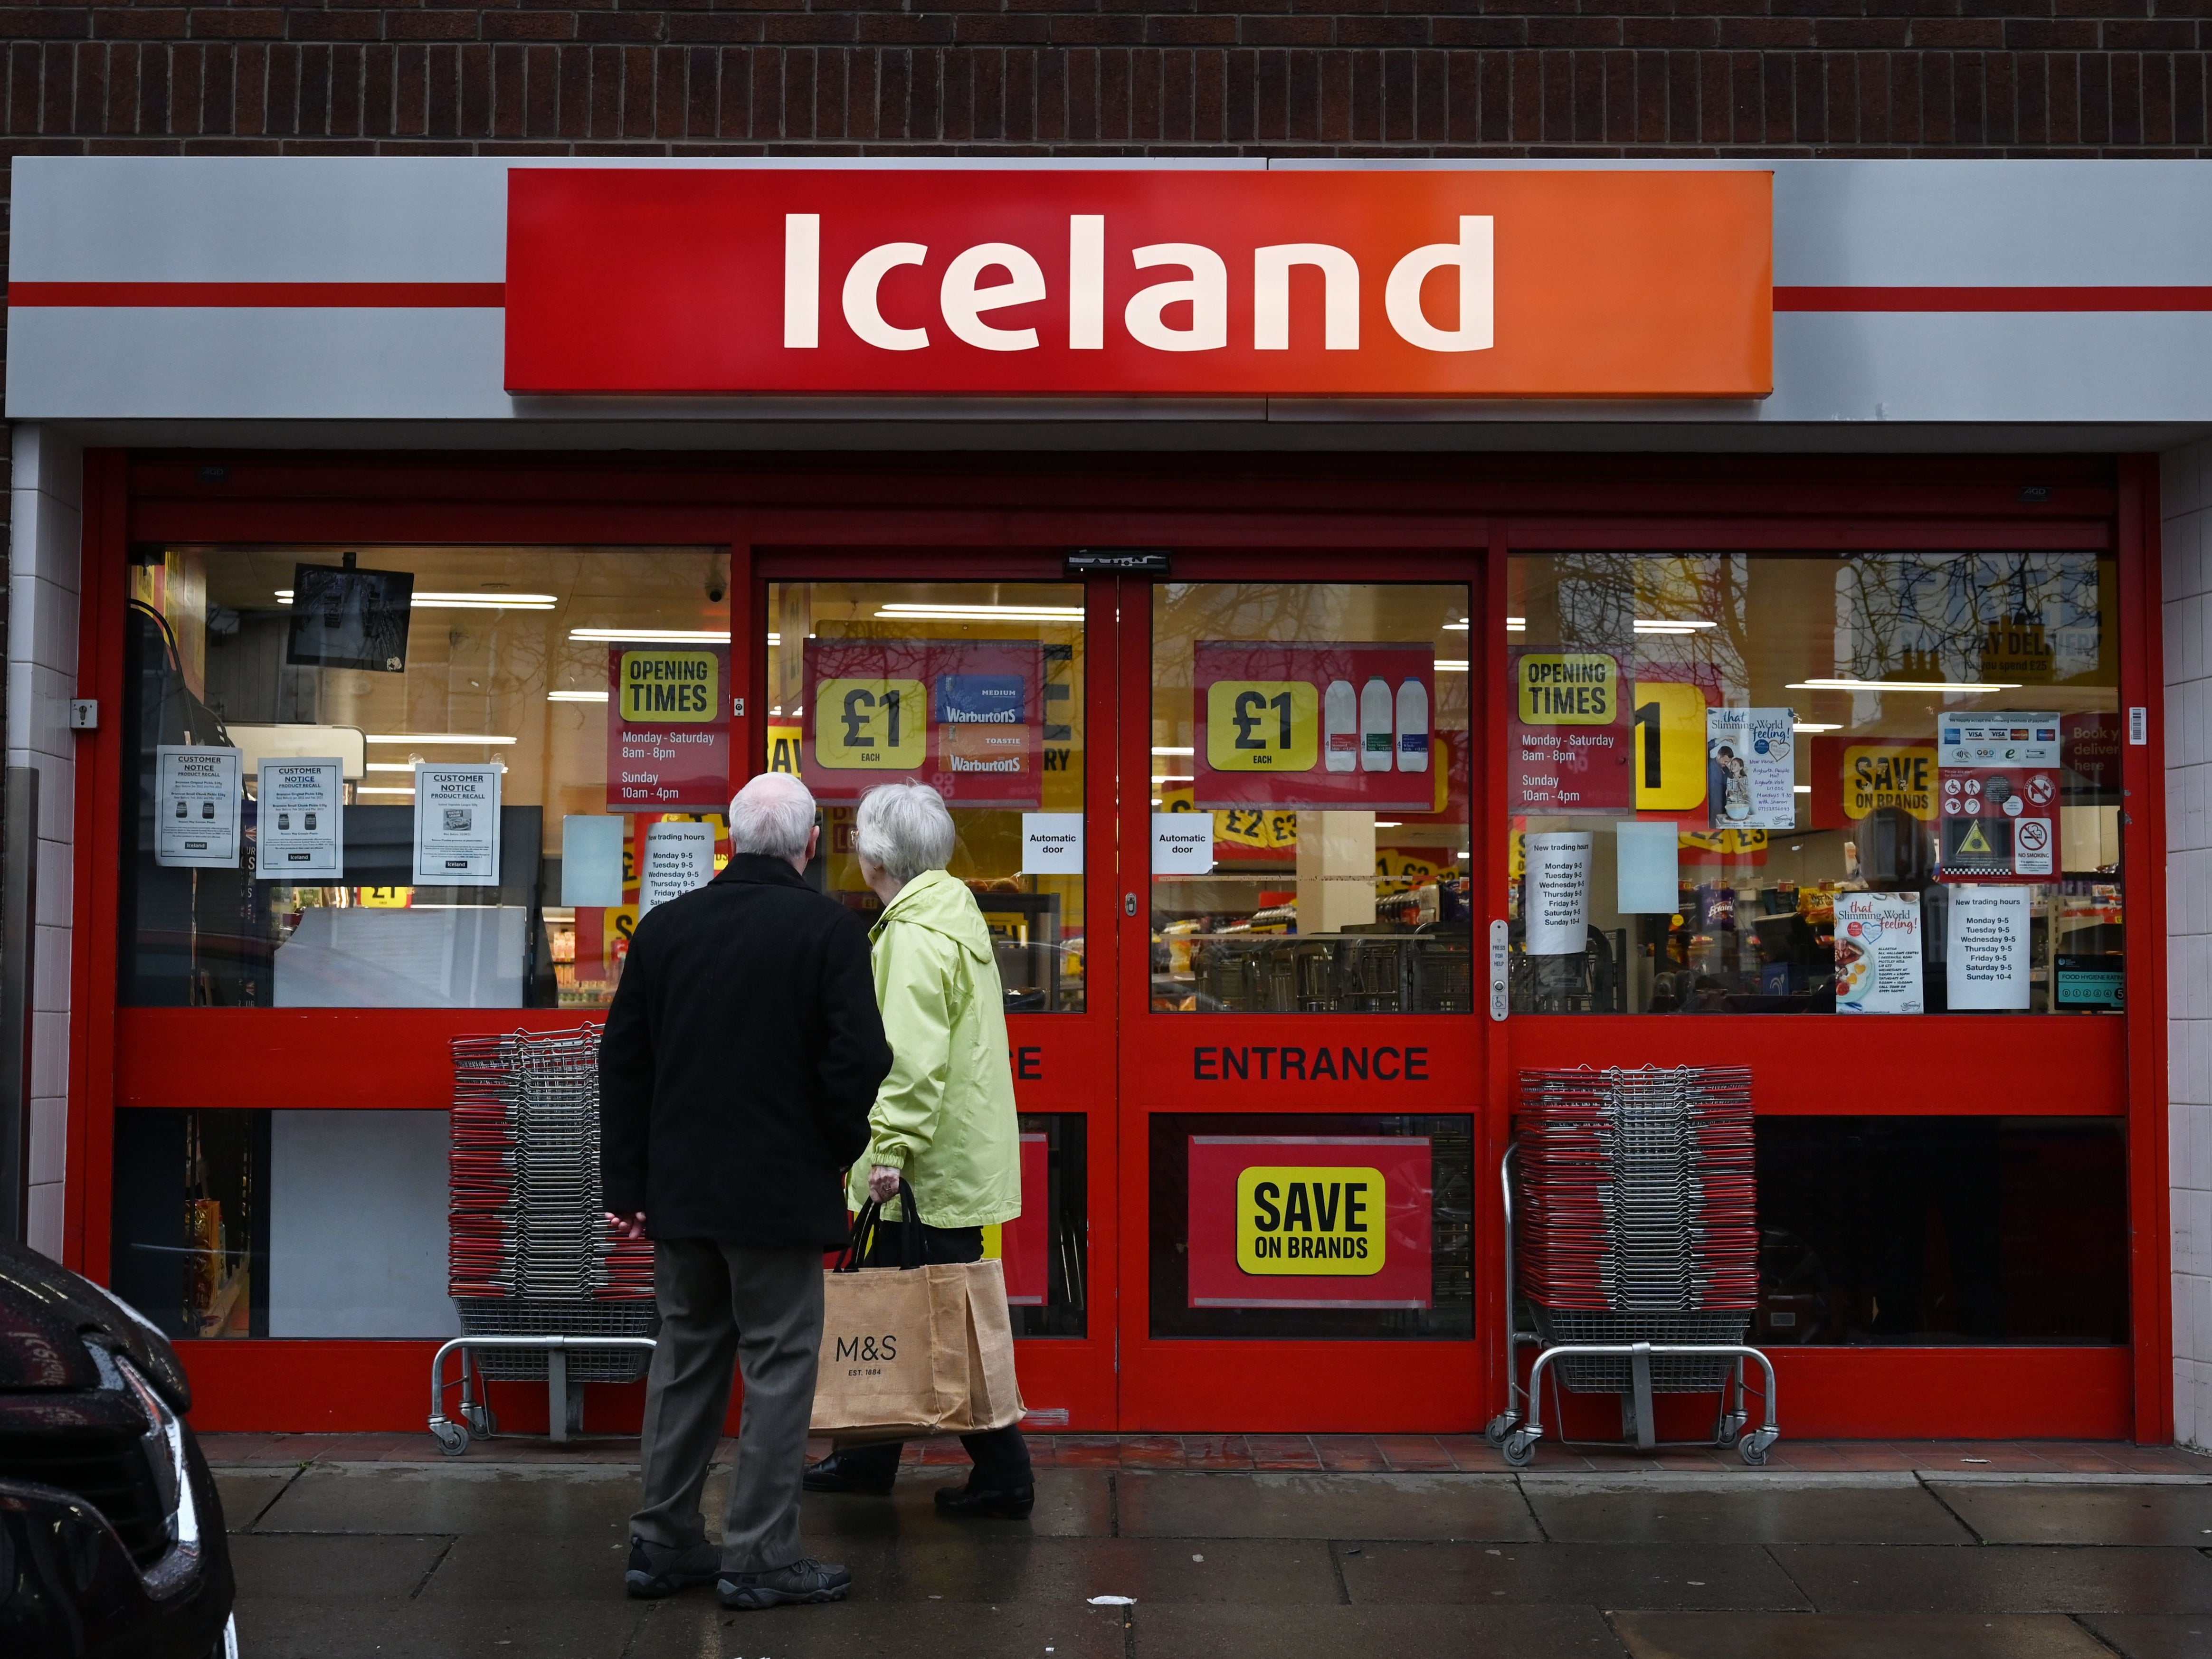 Iceland has come bottom in a new ranking on how sustainable major supermarkets are